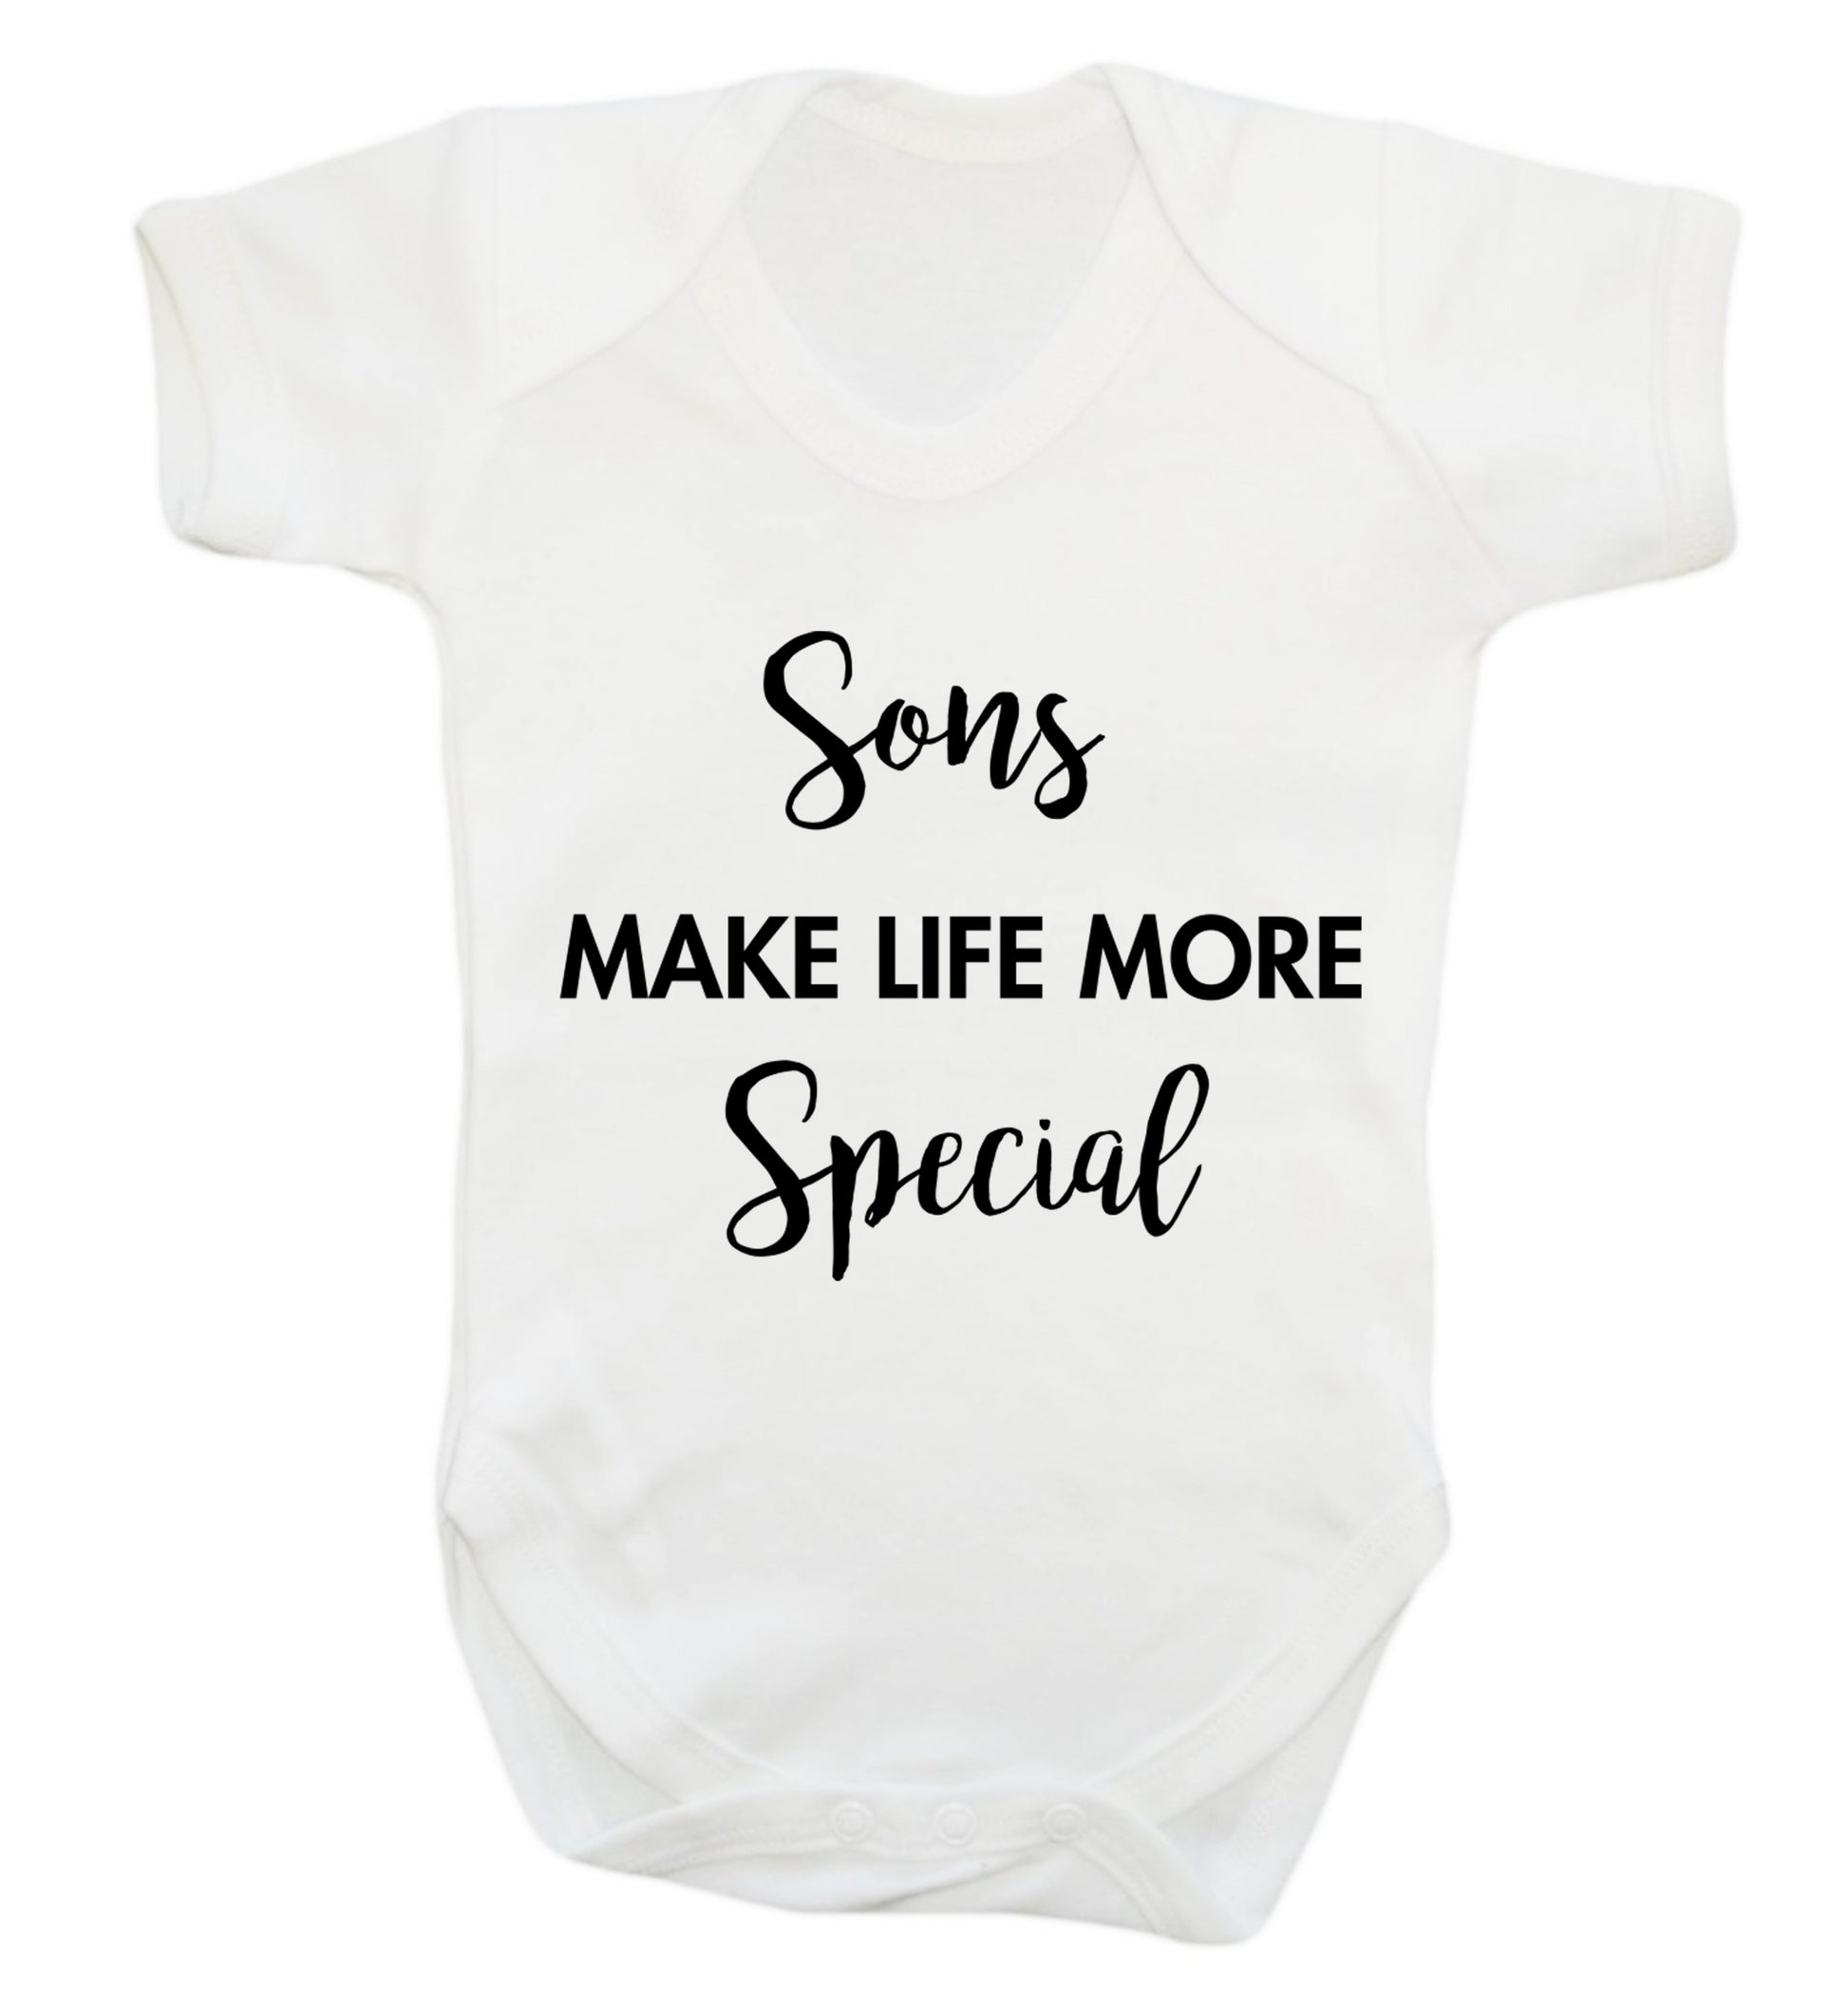 Sons make life more special Baby Vest white 18-24 months